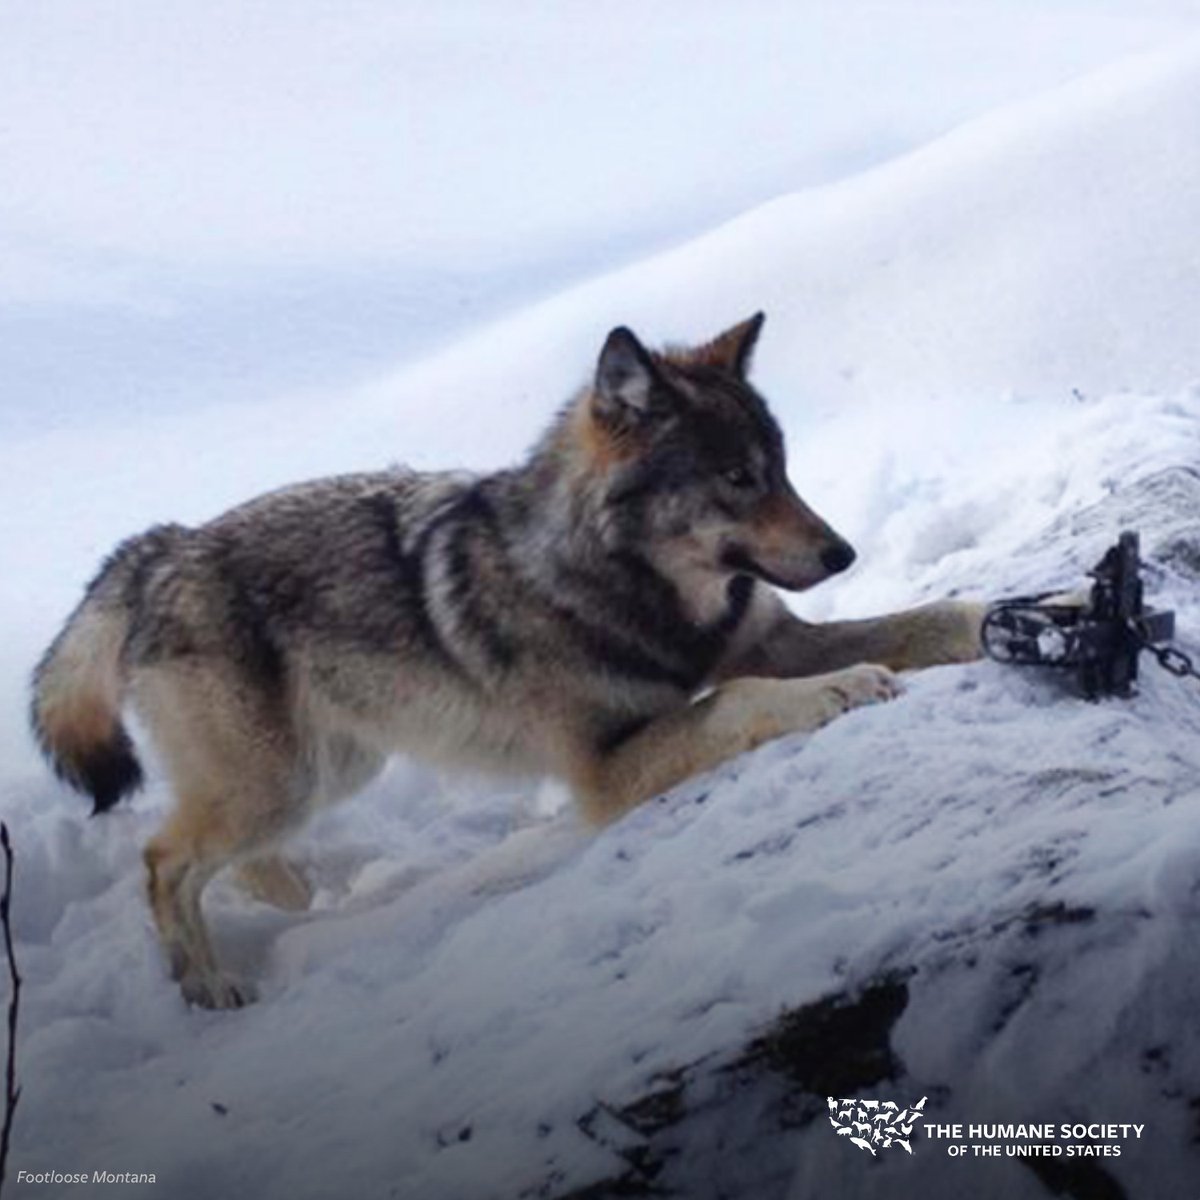 SPEAK UP TO PROTECT WILDLIFE! The recent House vote to eliminate Endangered Species Act protections for gray wolves and block judicial review of such action is not just alarming, it could prove a heartbreaking blow to the keystone species’ future survival. Urge your Senators to